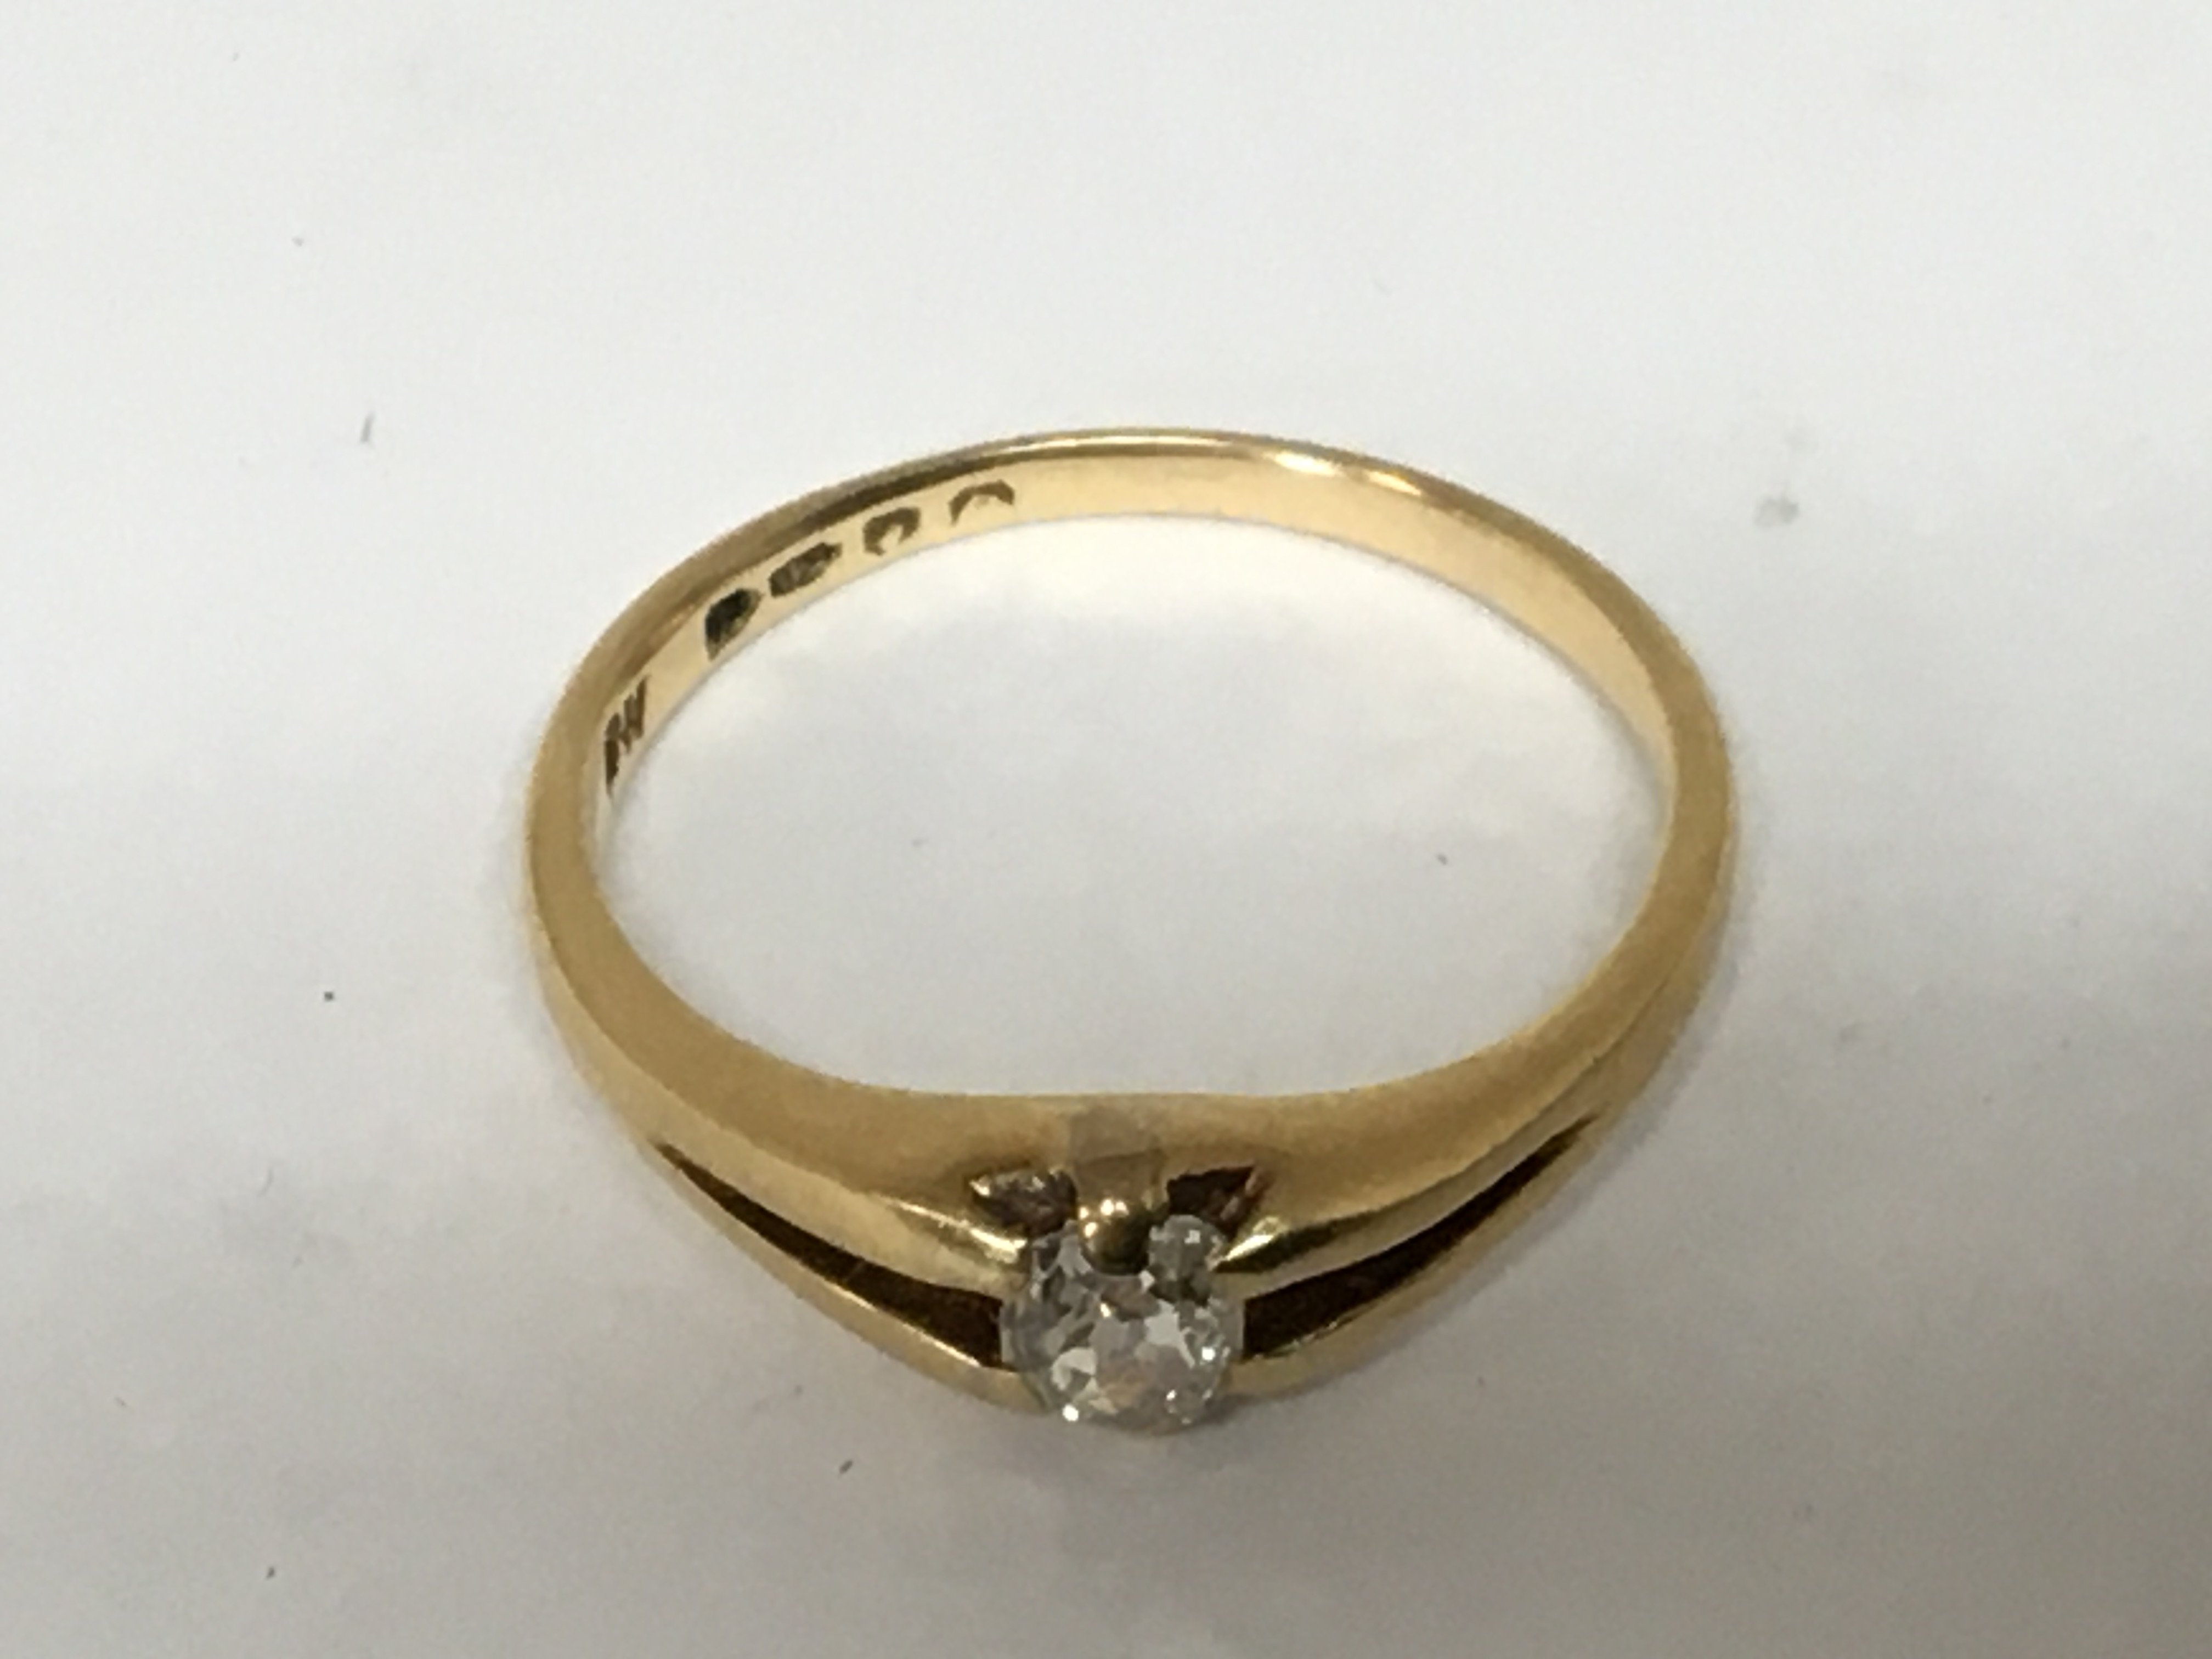 An 18carat gold ring set with a solitaire cushion cut diamonds approximately 0.25-0.3 of a carat